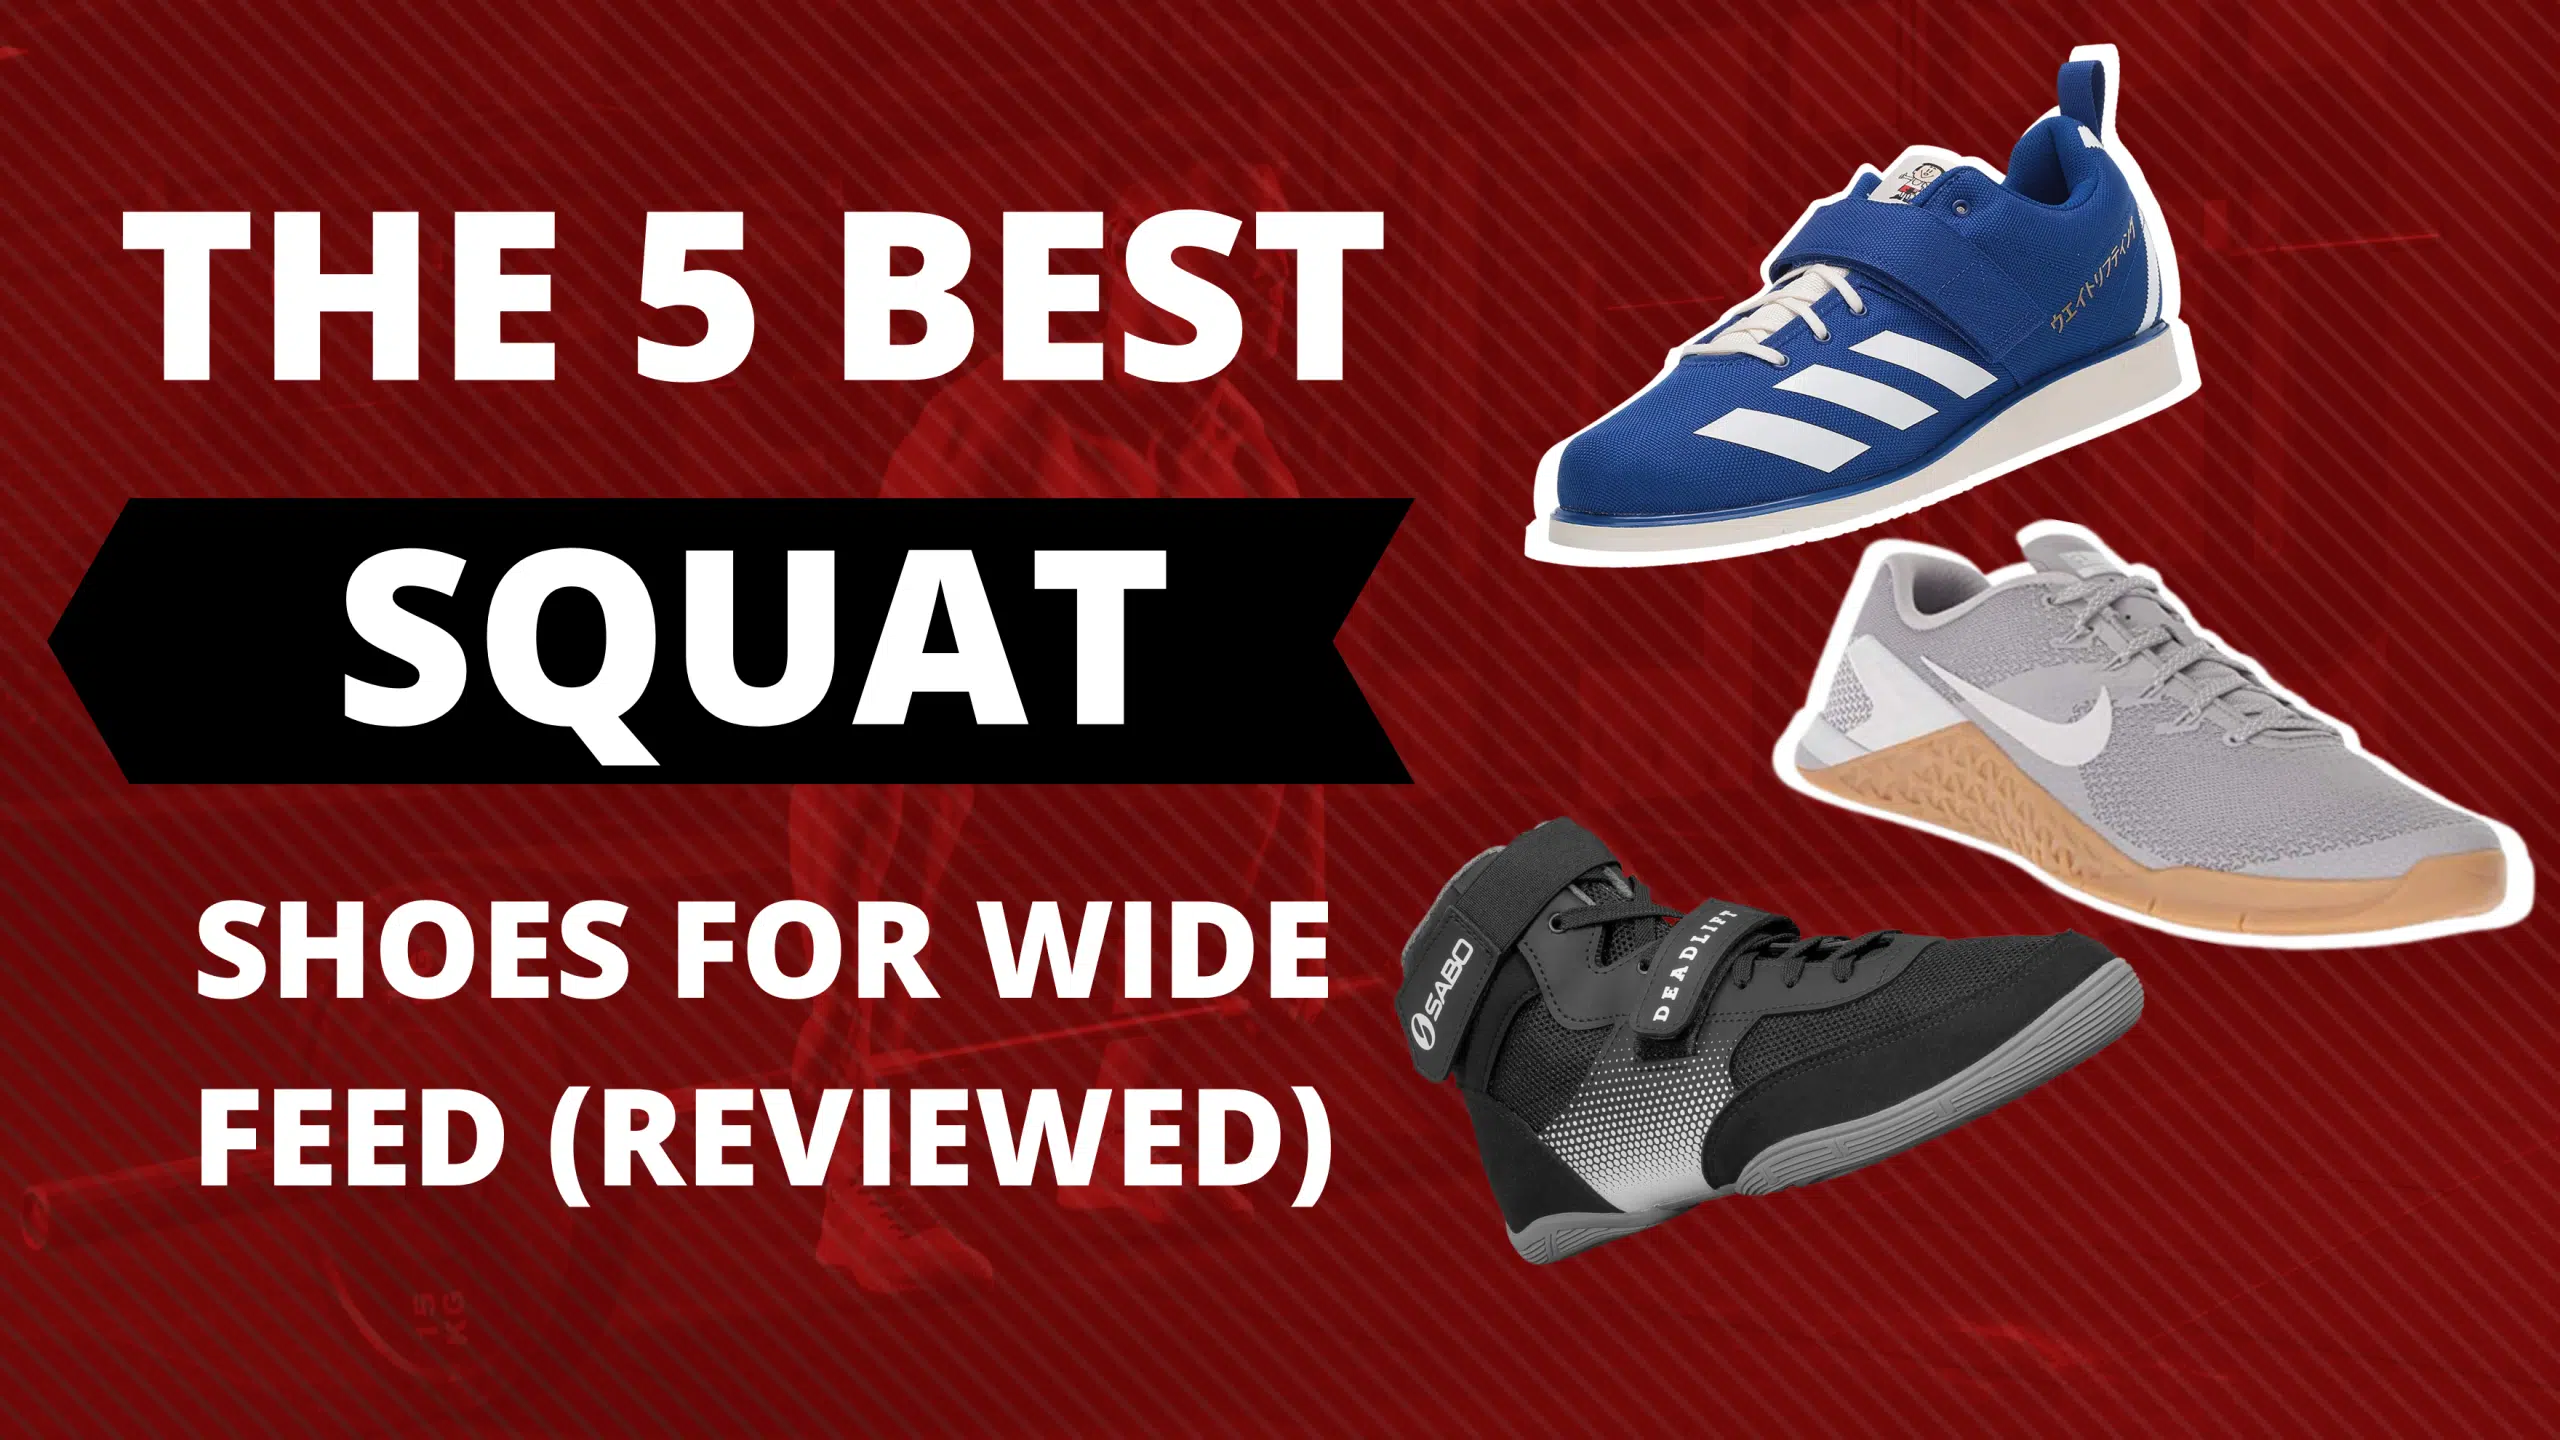 The 5 Best Squat Shoes for Wide Feet (Reviewed) 2023